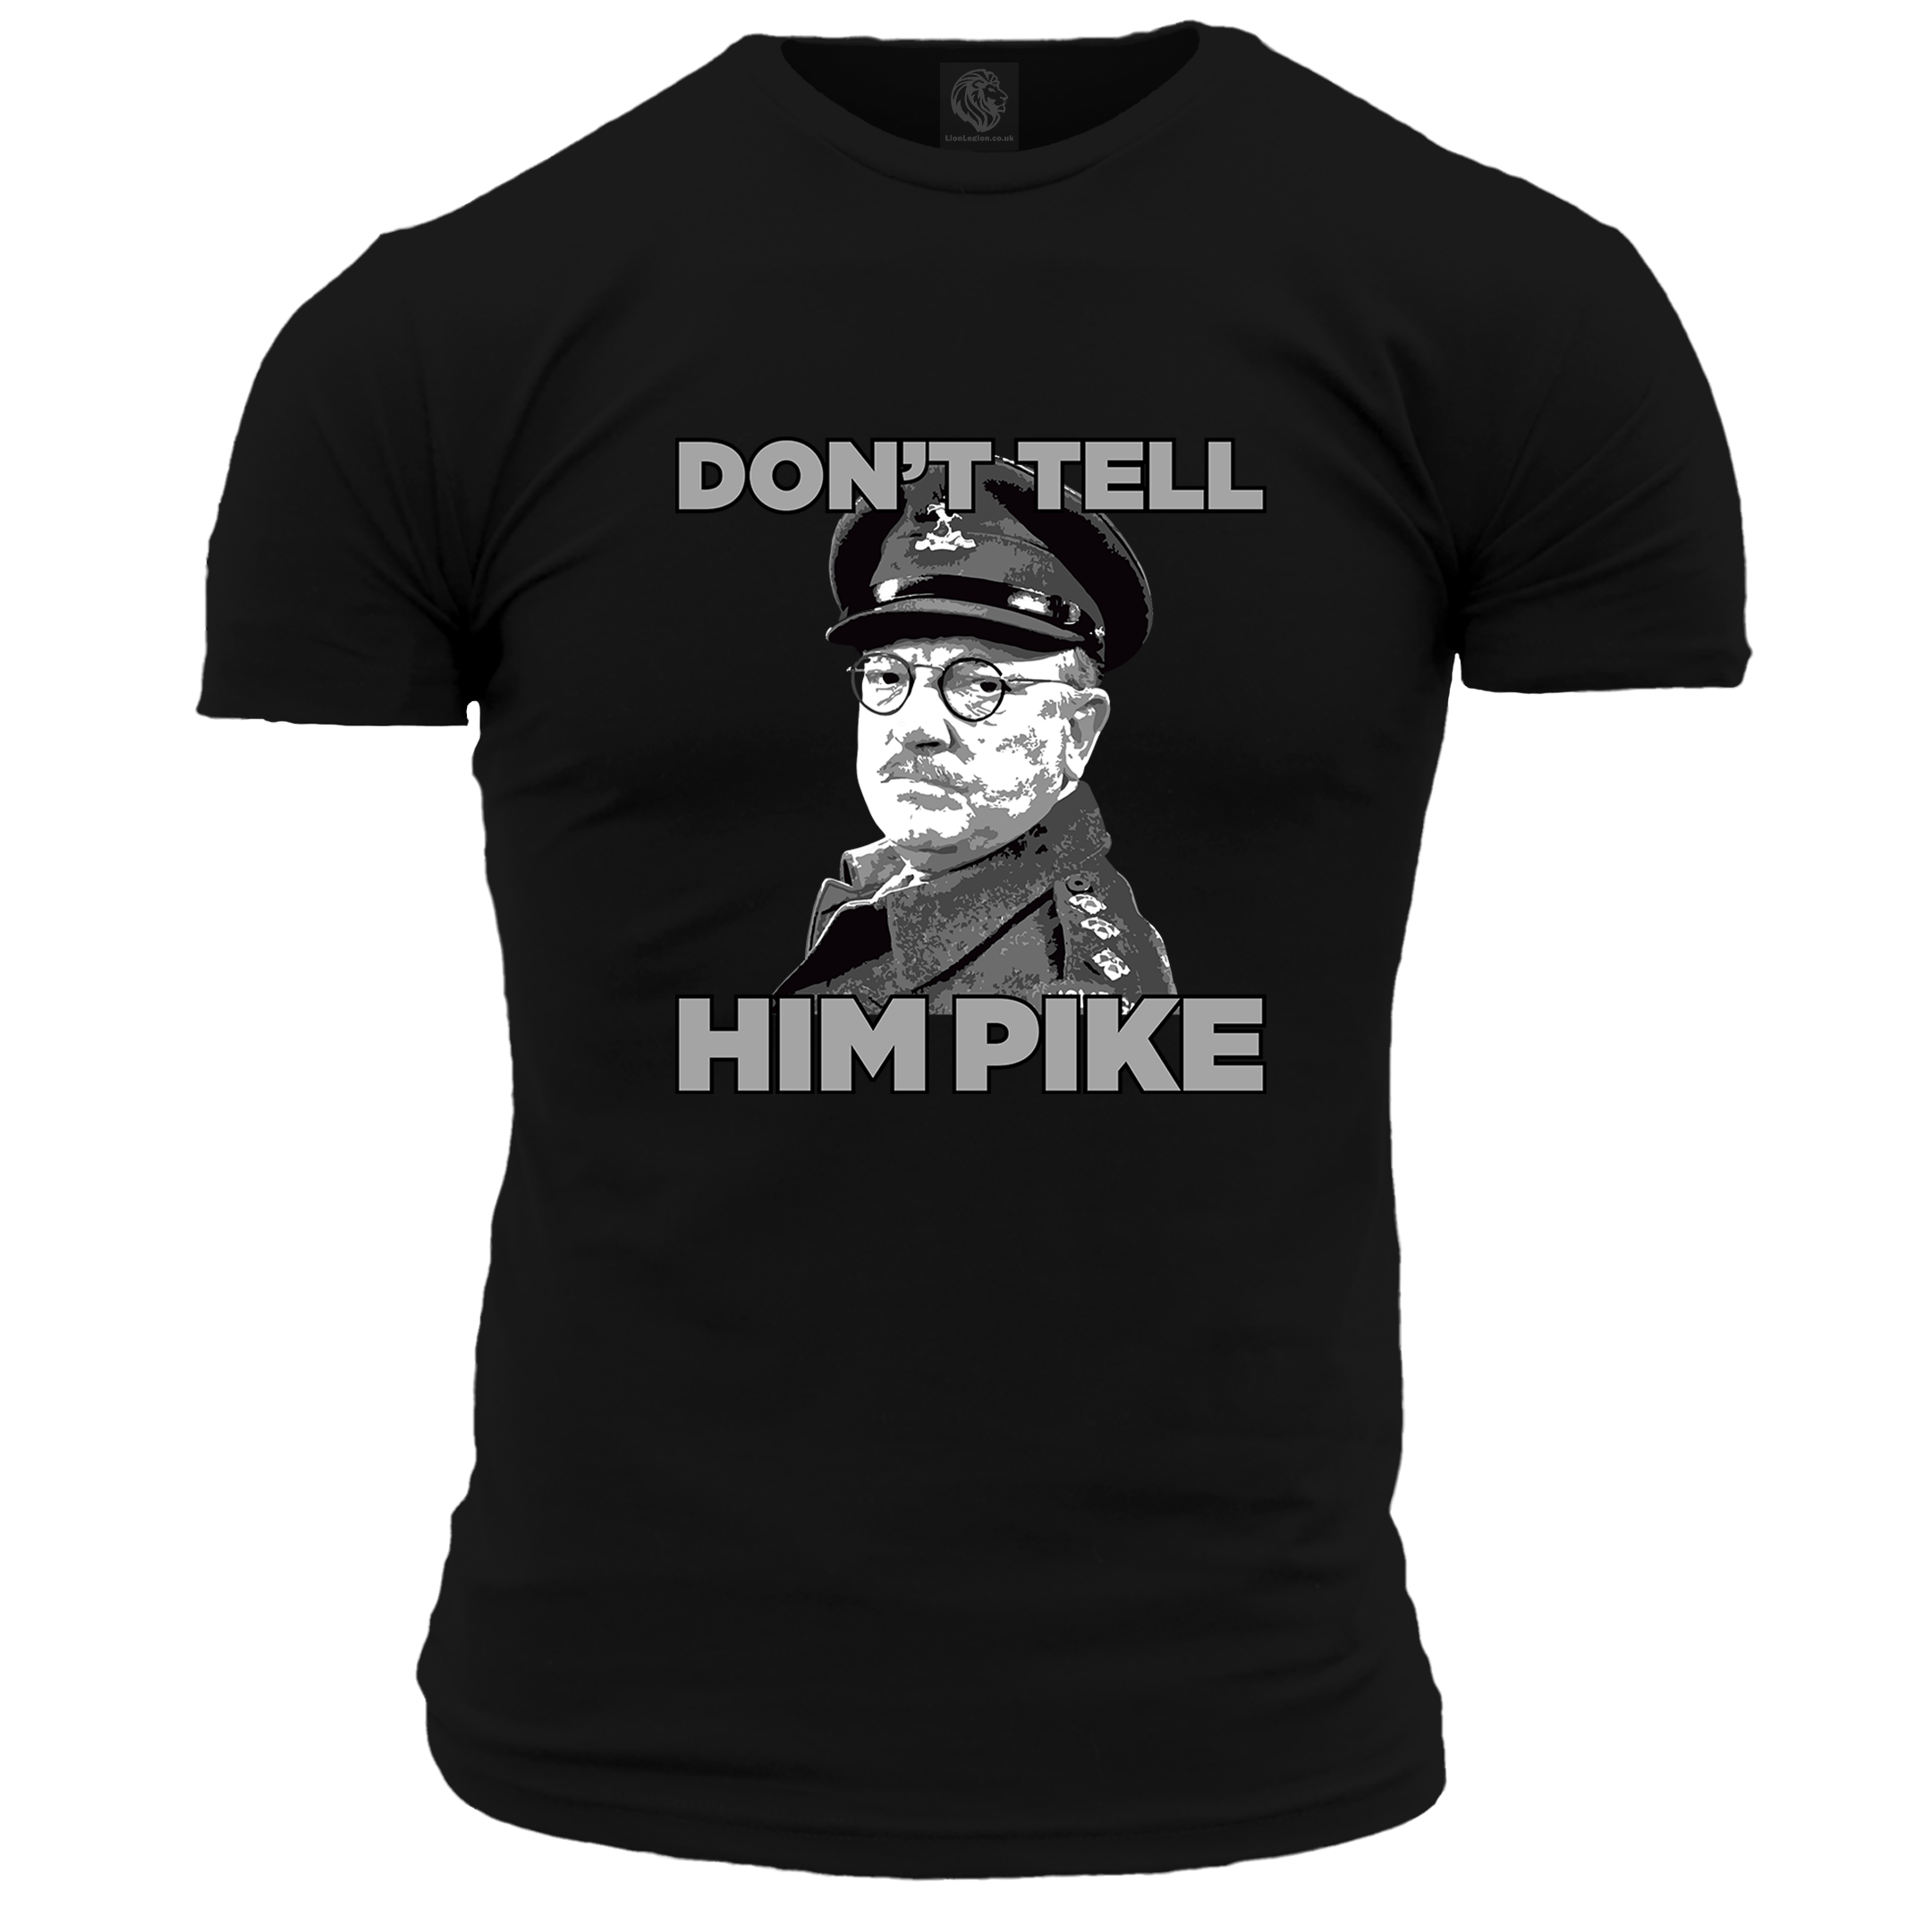 Don't Tell Him Pike T Shirt, funny TV Classic